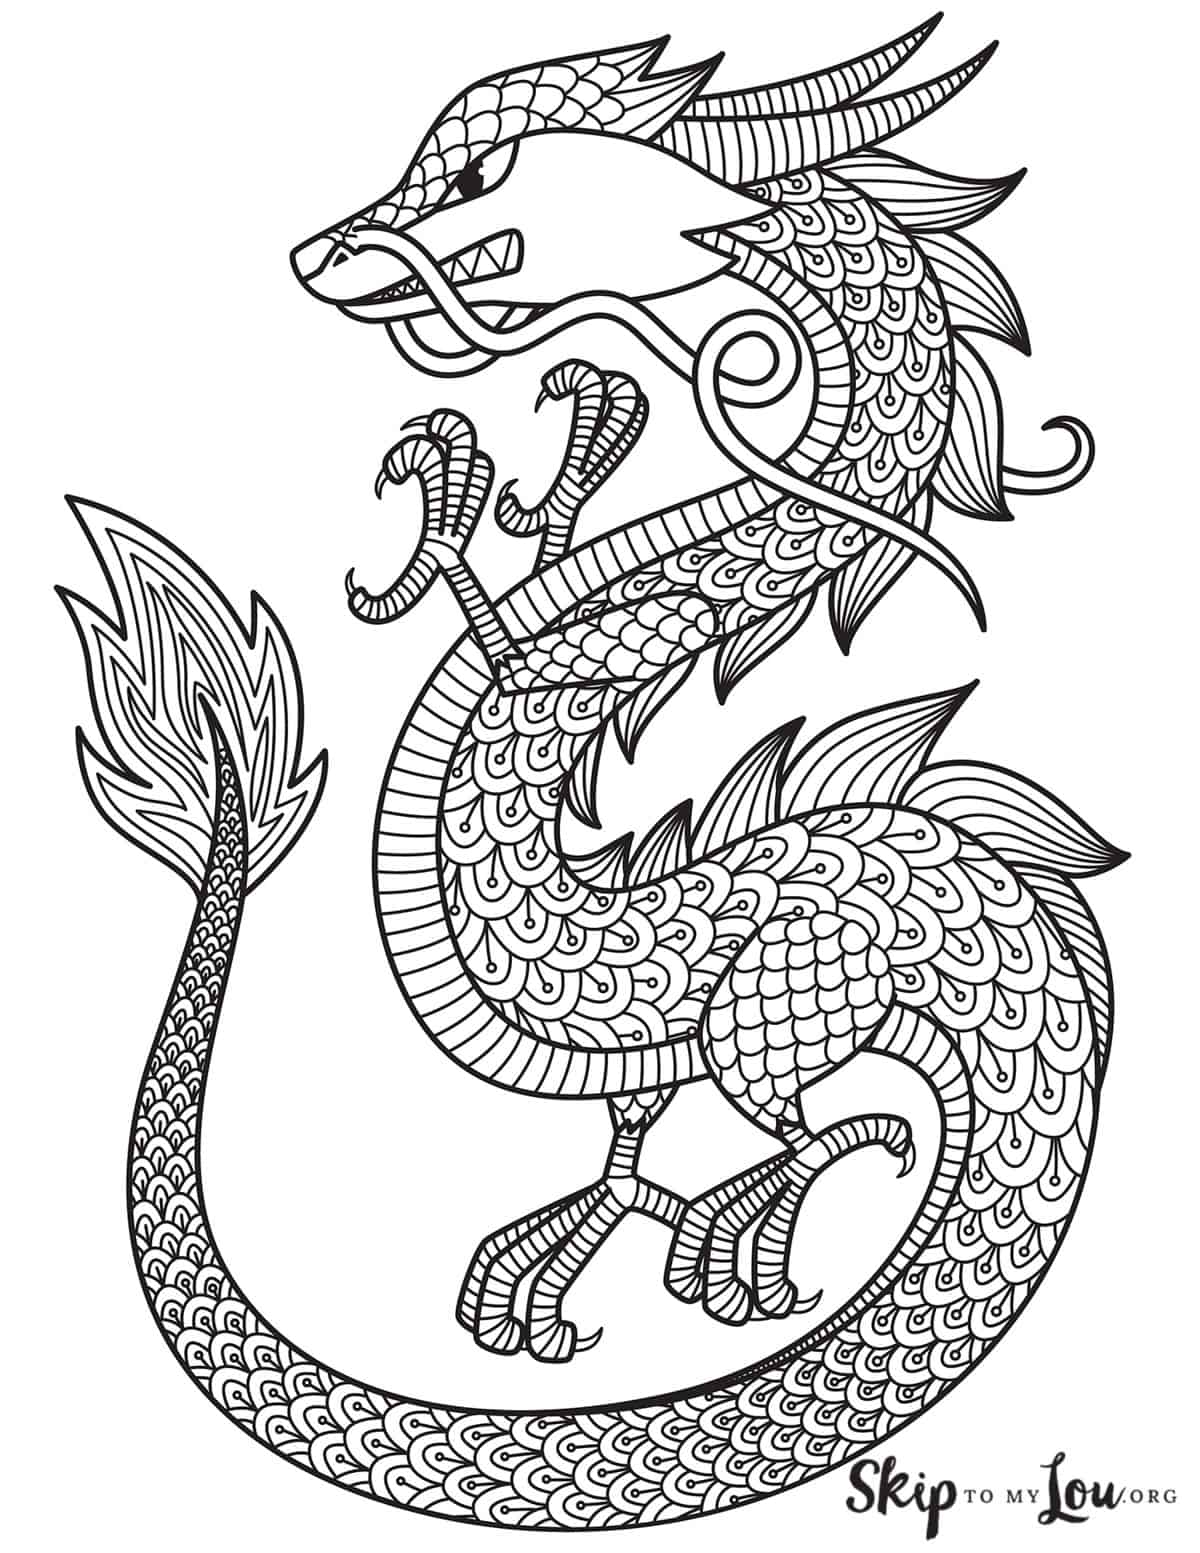 Fierce looking Chinese dragon in black and white with a flaming tail and sharp claws on its toes, by Skip to my Lou.